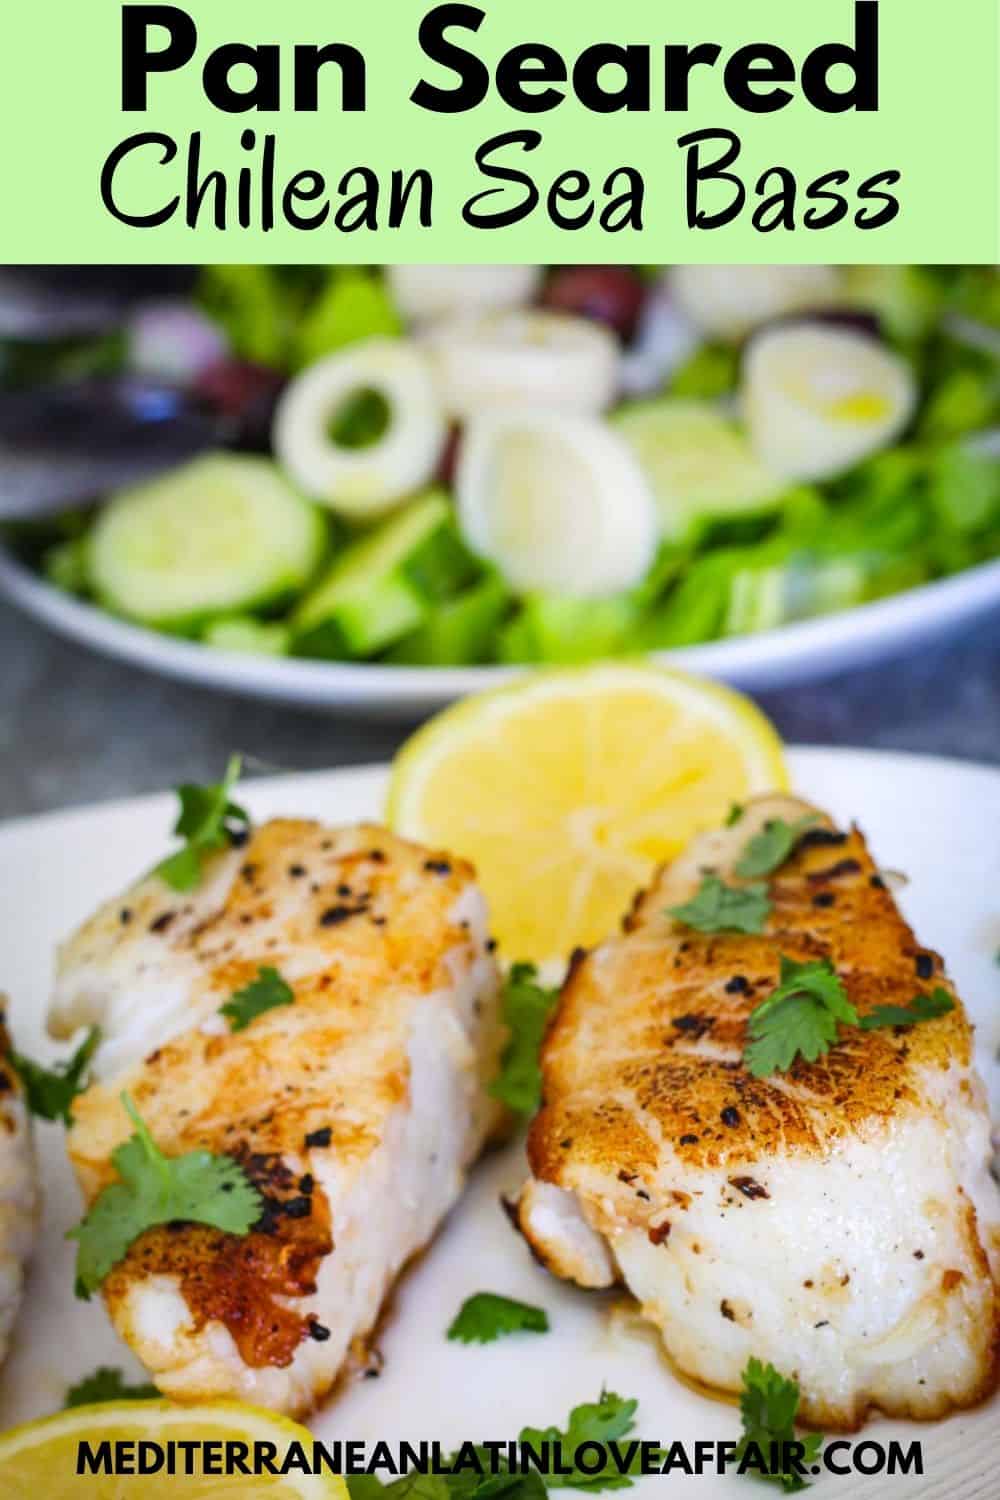 Pan Seared Chilean Sea Bass dish with a salad in the background. Image is prepared for Pinterest, it shows a Pinterest title bar on top of the picture and a website link in the bottom. 